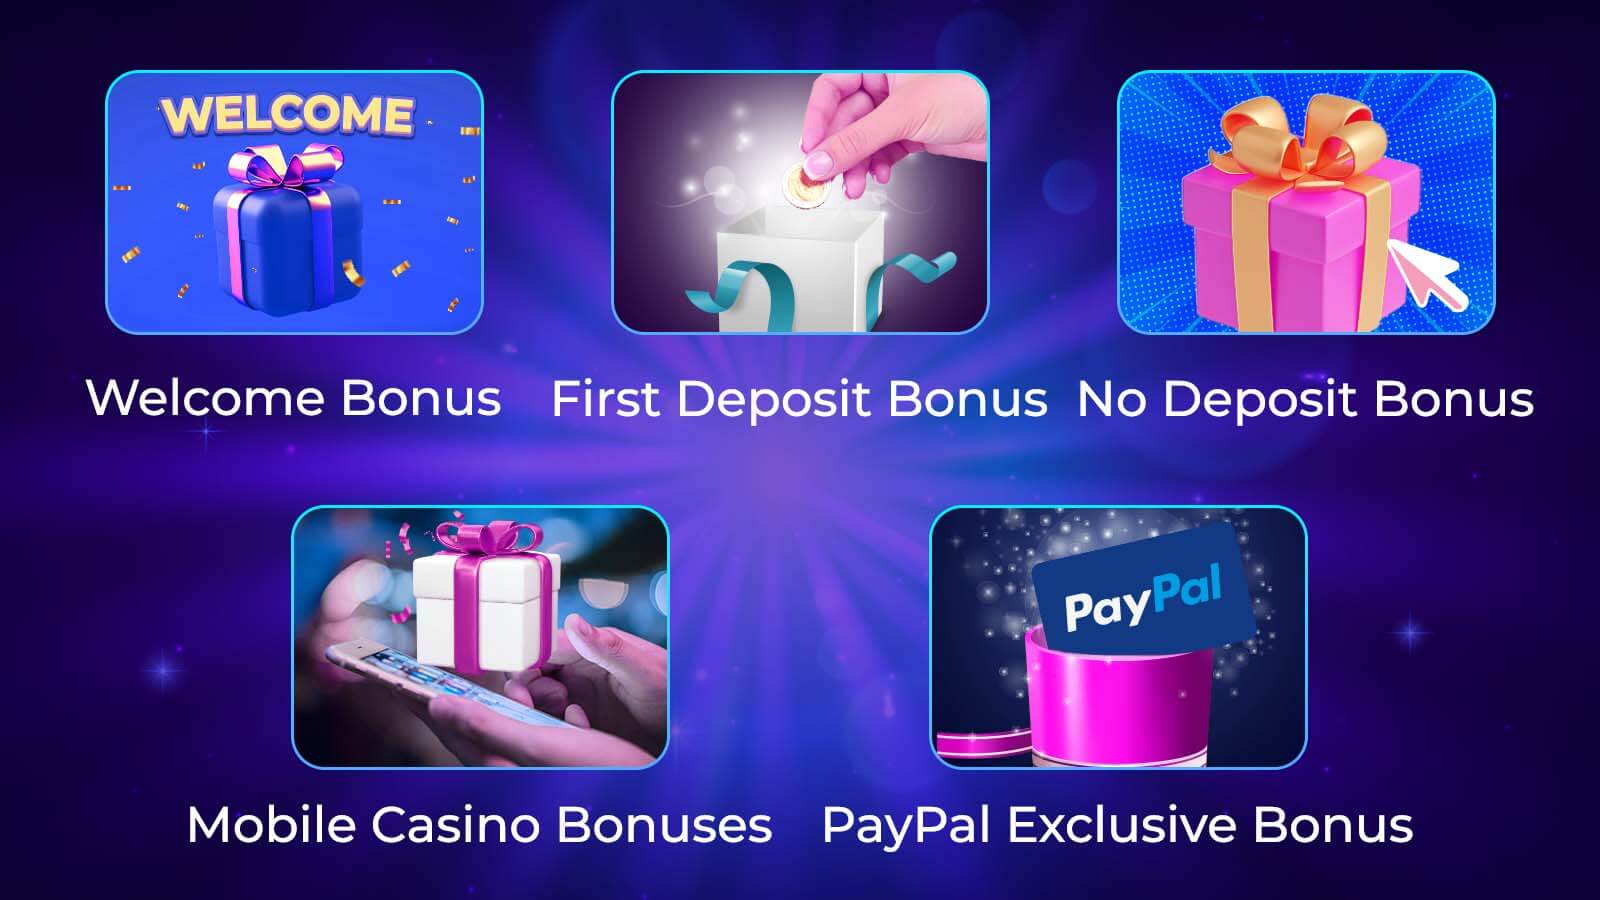 Bingo Incentive Types on Platforms with PayPal